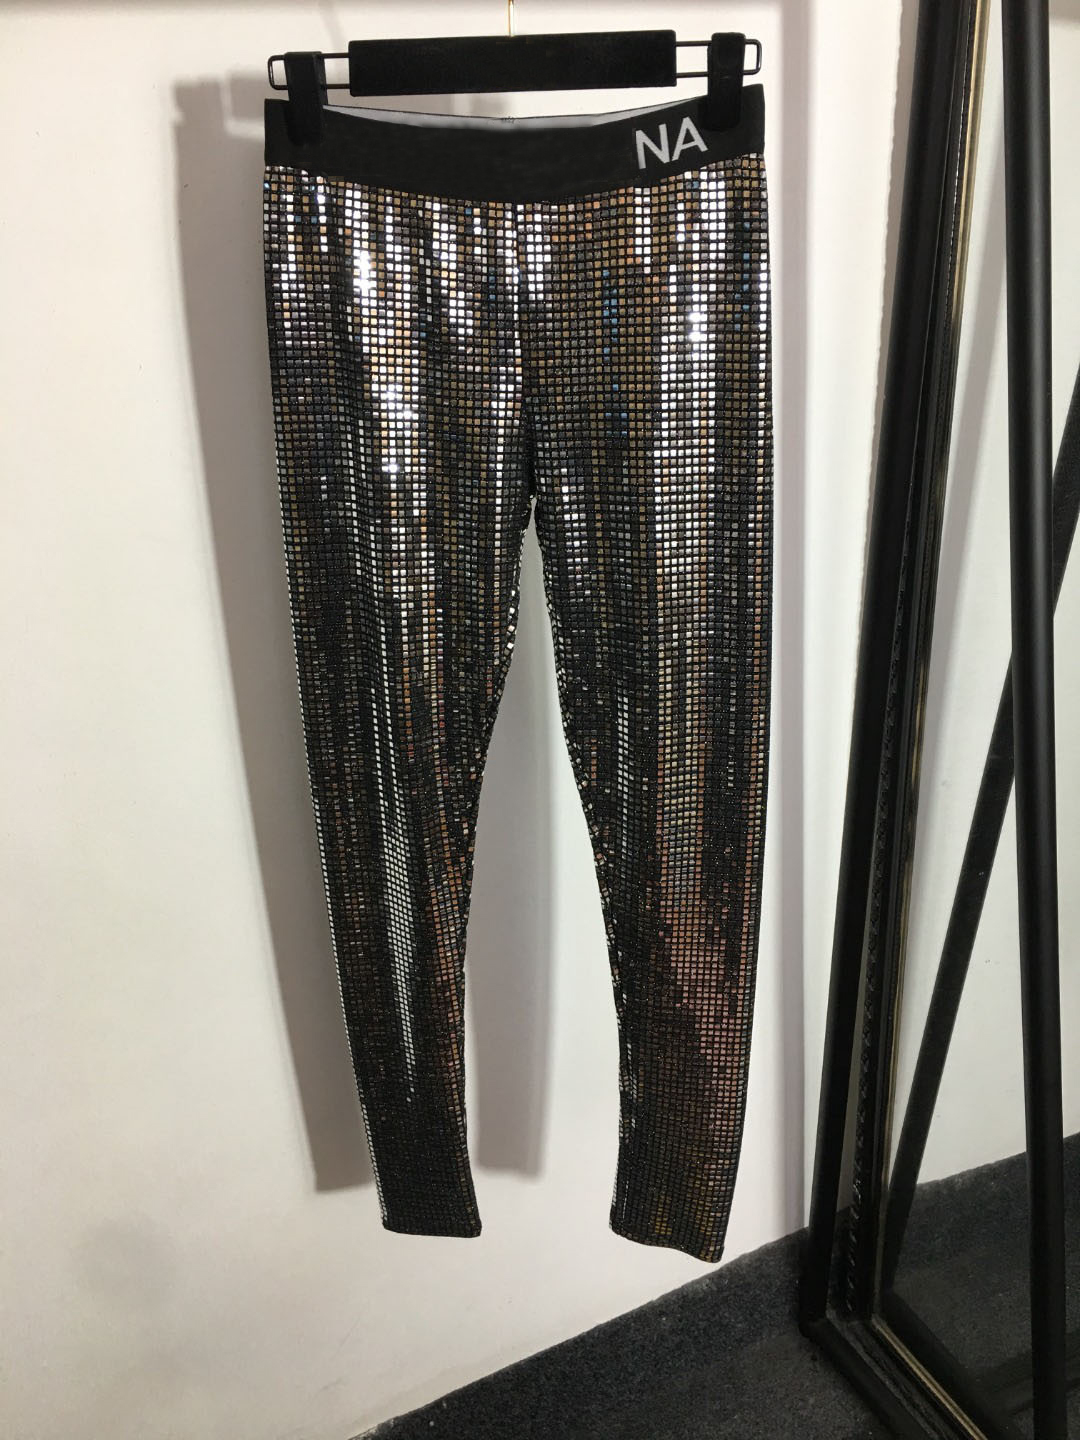 Women Tracksuits Outfits Pants Letter Sequin Grid Printed Sets Sportswear T-Shirt Top Pants Suits Streetwear Leggings